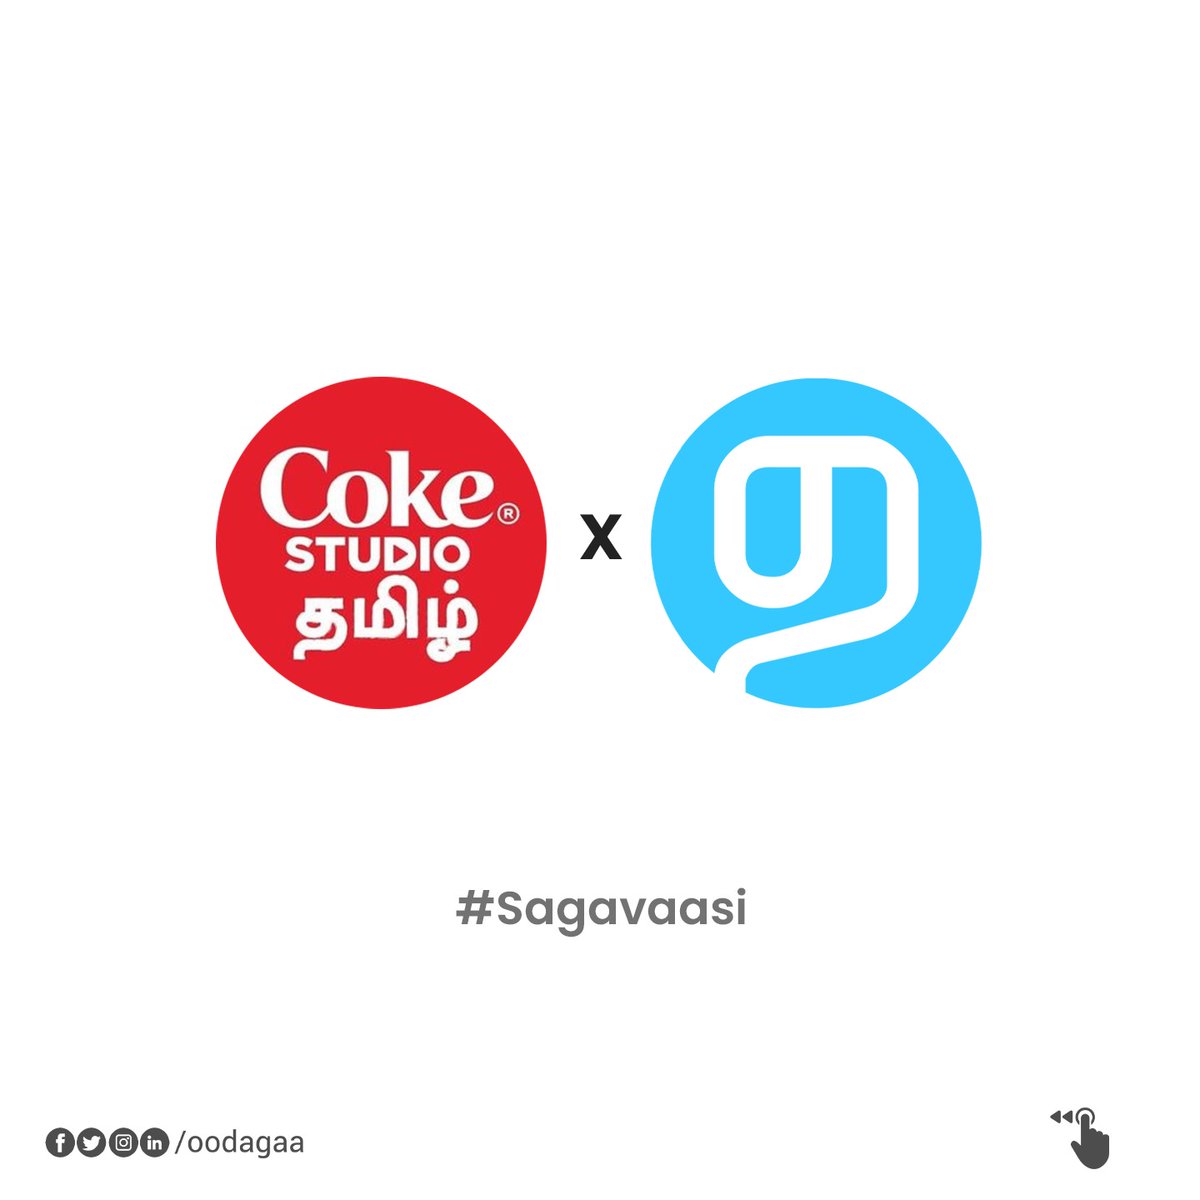 It was a great experience for us and our uniquely talented creators working with #CokeStudioTamil 

#InfluencerMarketing #Oodagaa #Sagavaasi